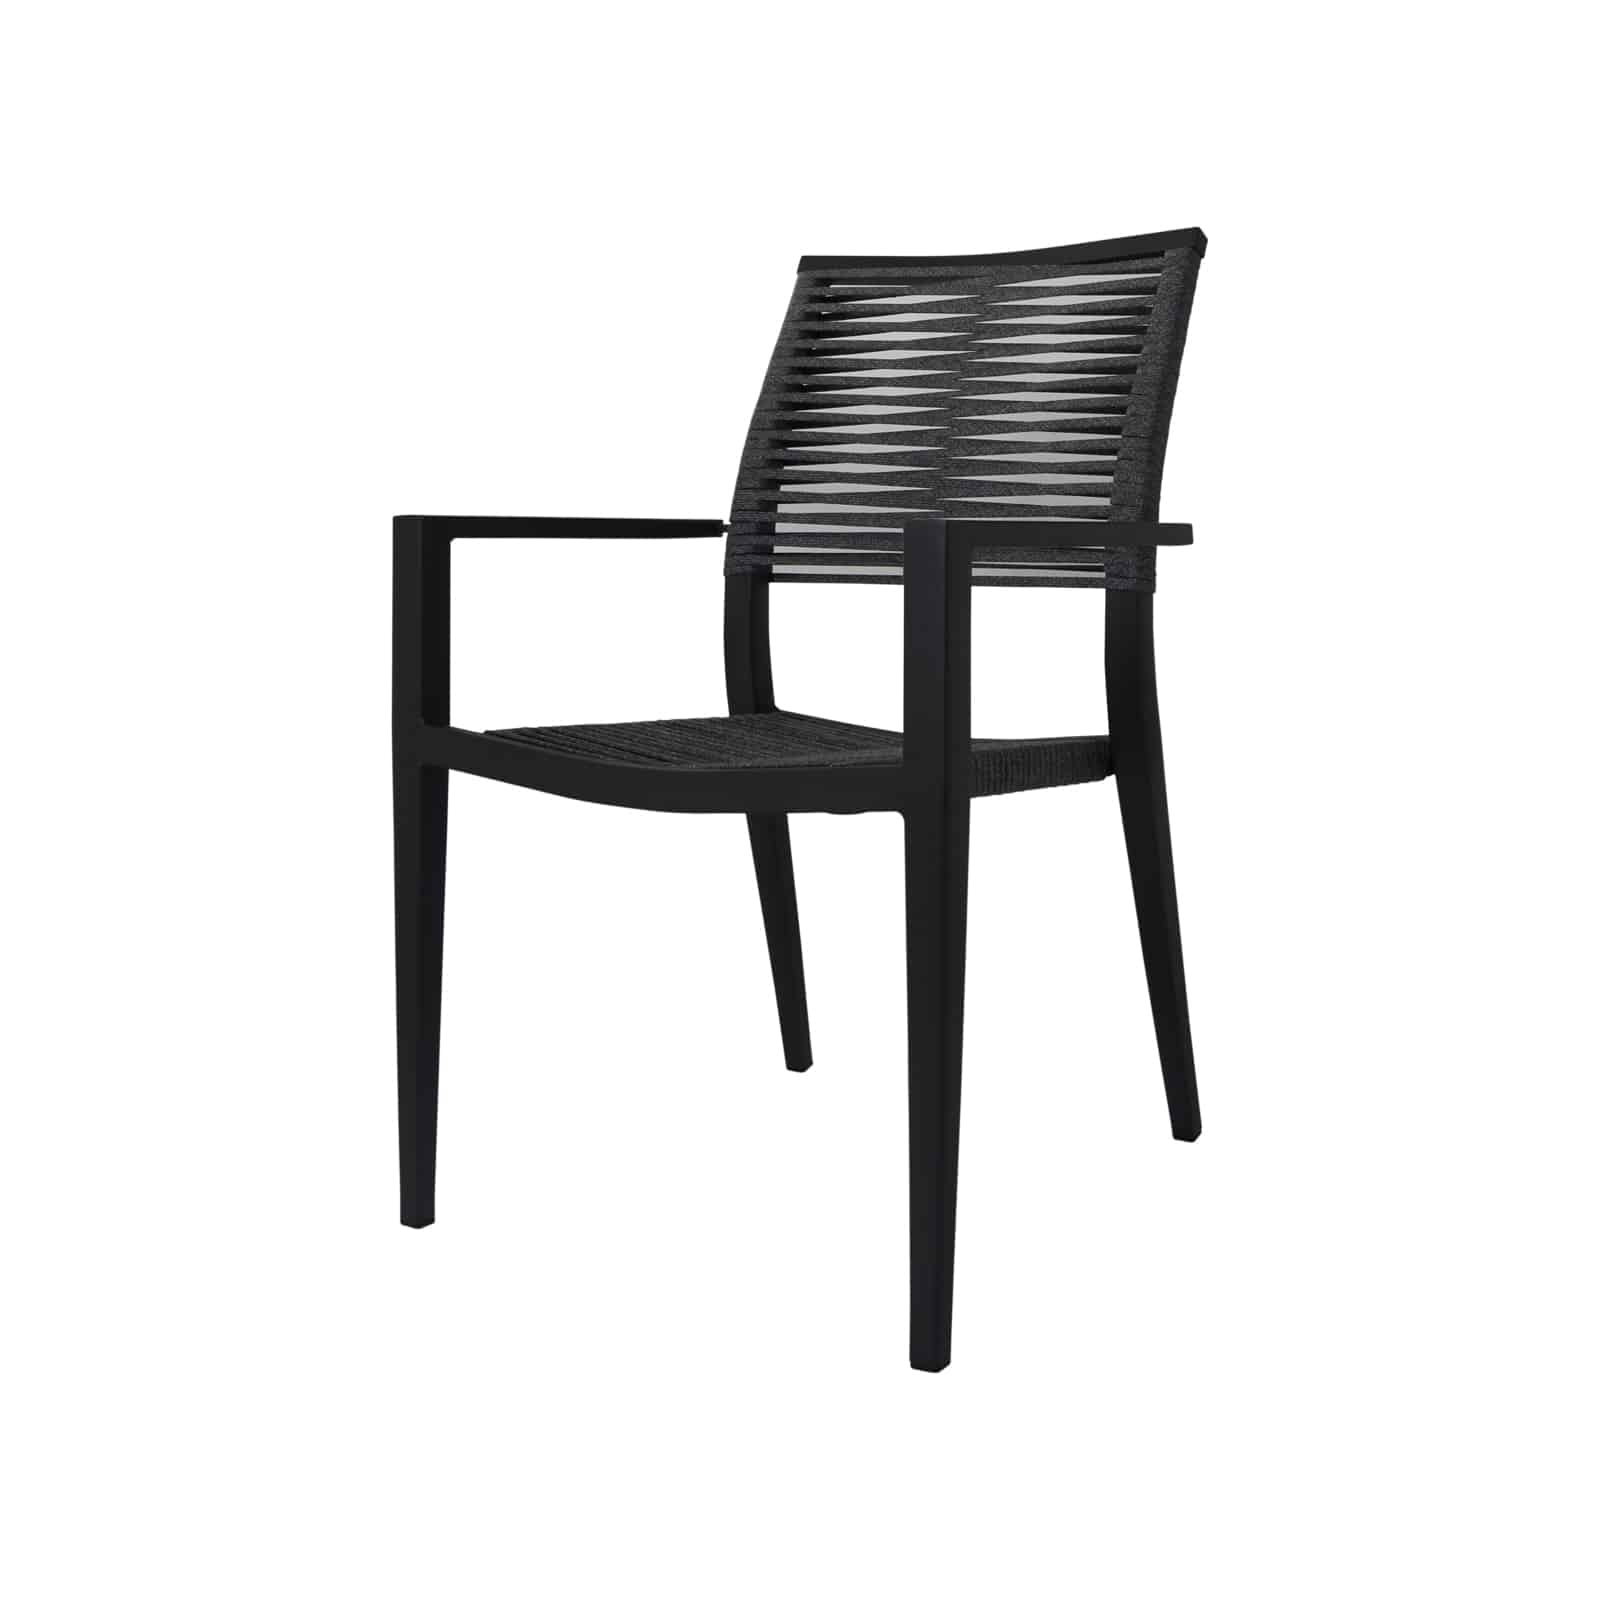 Chloe Source - Chair Furniture Imports Arm Rope Rattan Dining